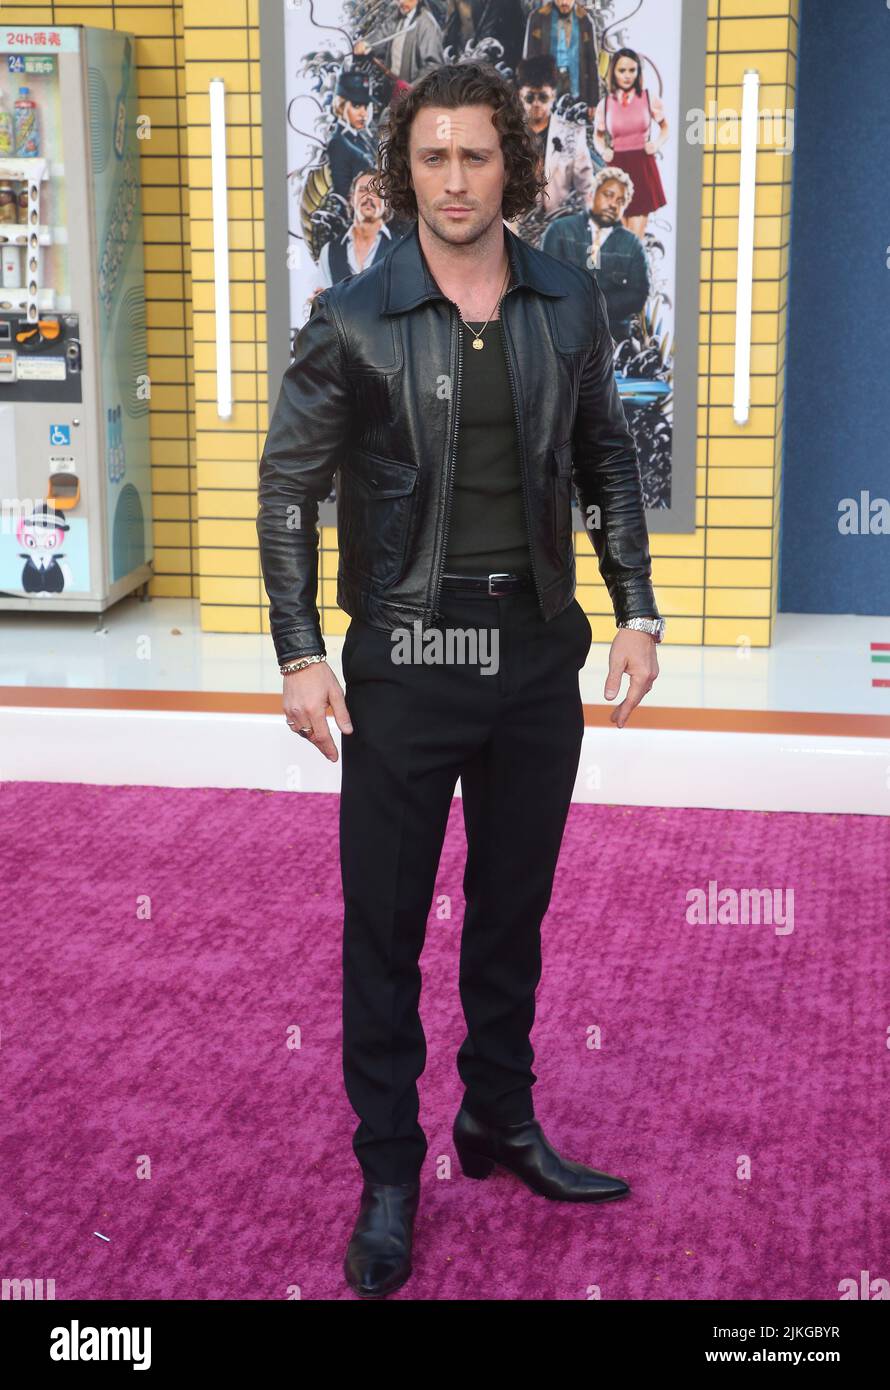 Los Angeles, Ca. 1st Aug, 2022. Aaron Taylor-Johnson, at the Los Angeles Premiere Of Columbia Pictures' Bullet Train at the Regency Village Theater in Los Angeles, California on August 1, 2022. Credit: Faye Sadou/Media Punch/Alamy Live News Stock Photo